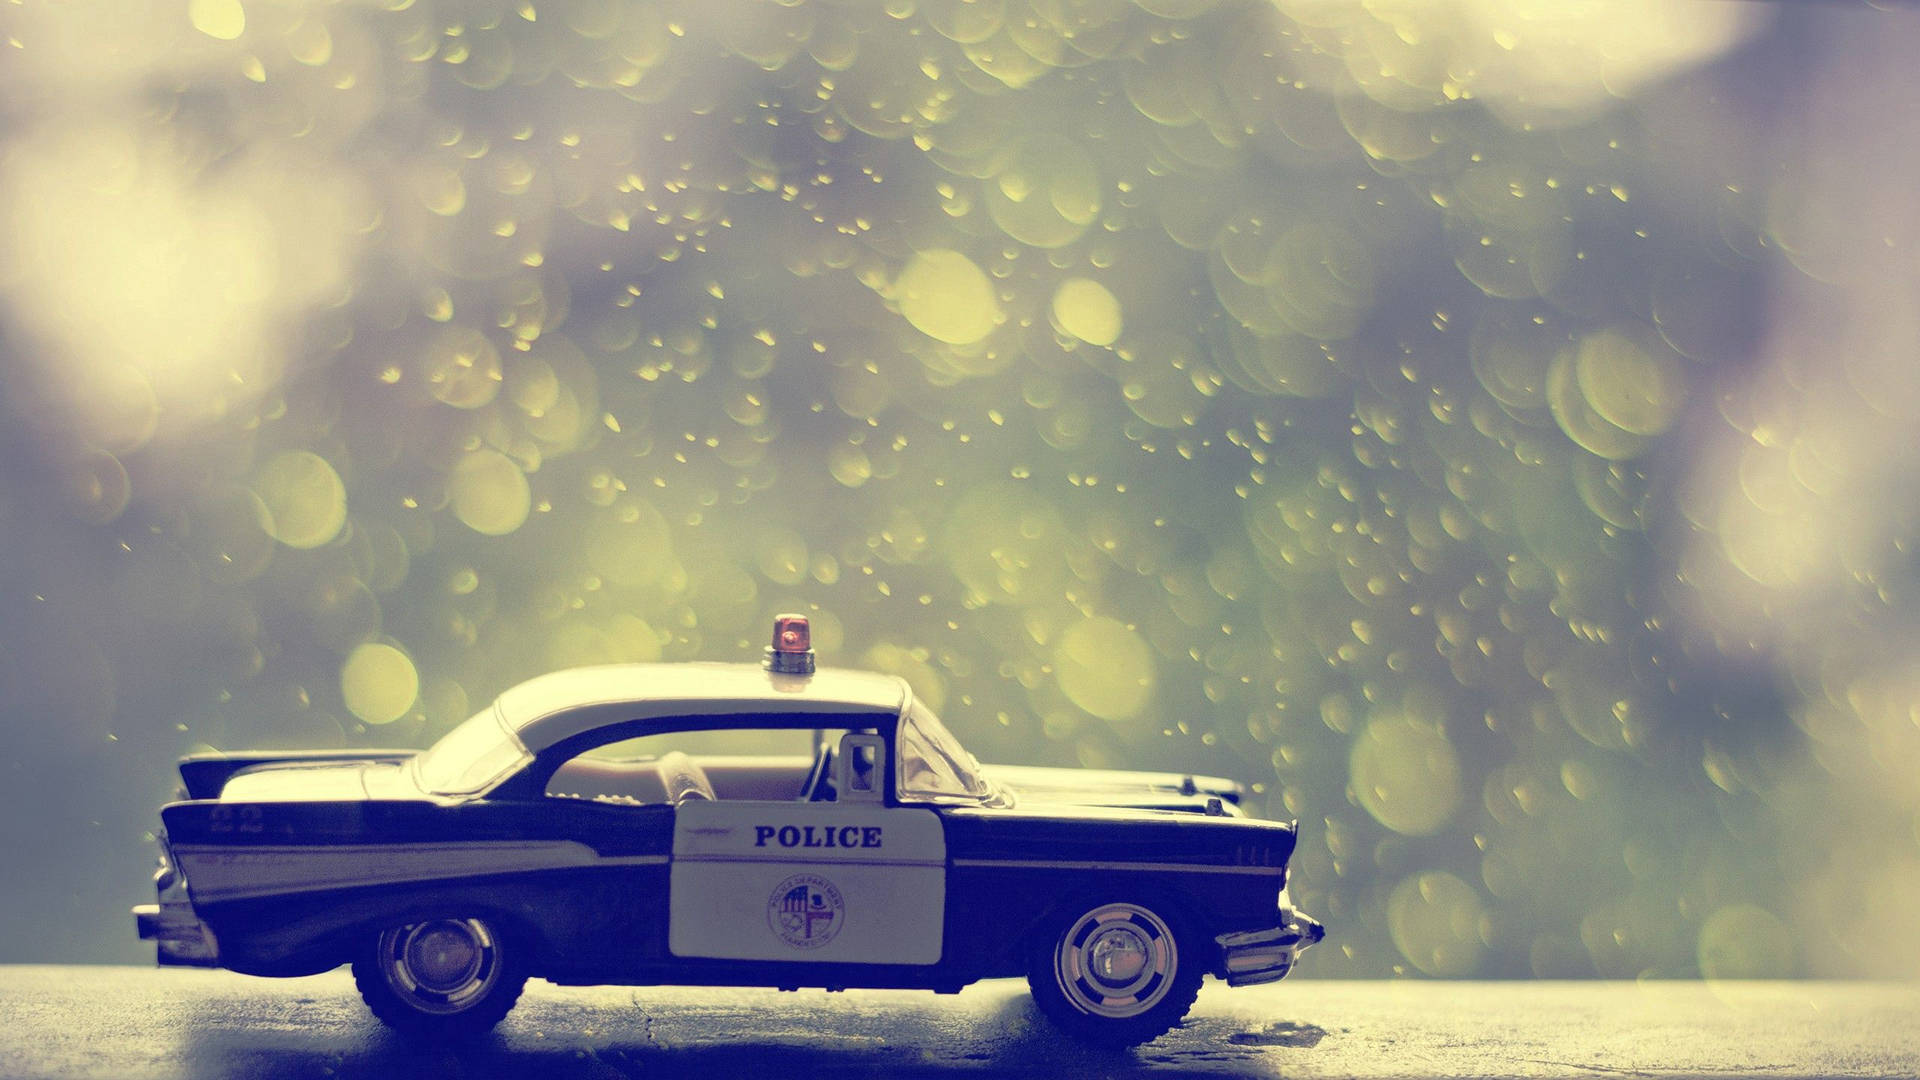 Police 2560X1440 Wallpaper and Background Image